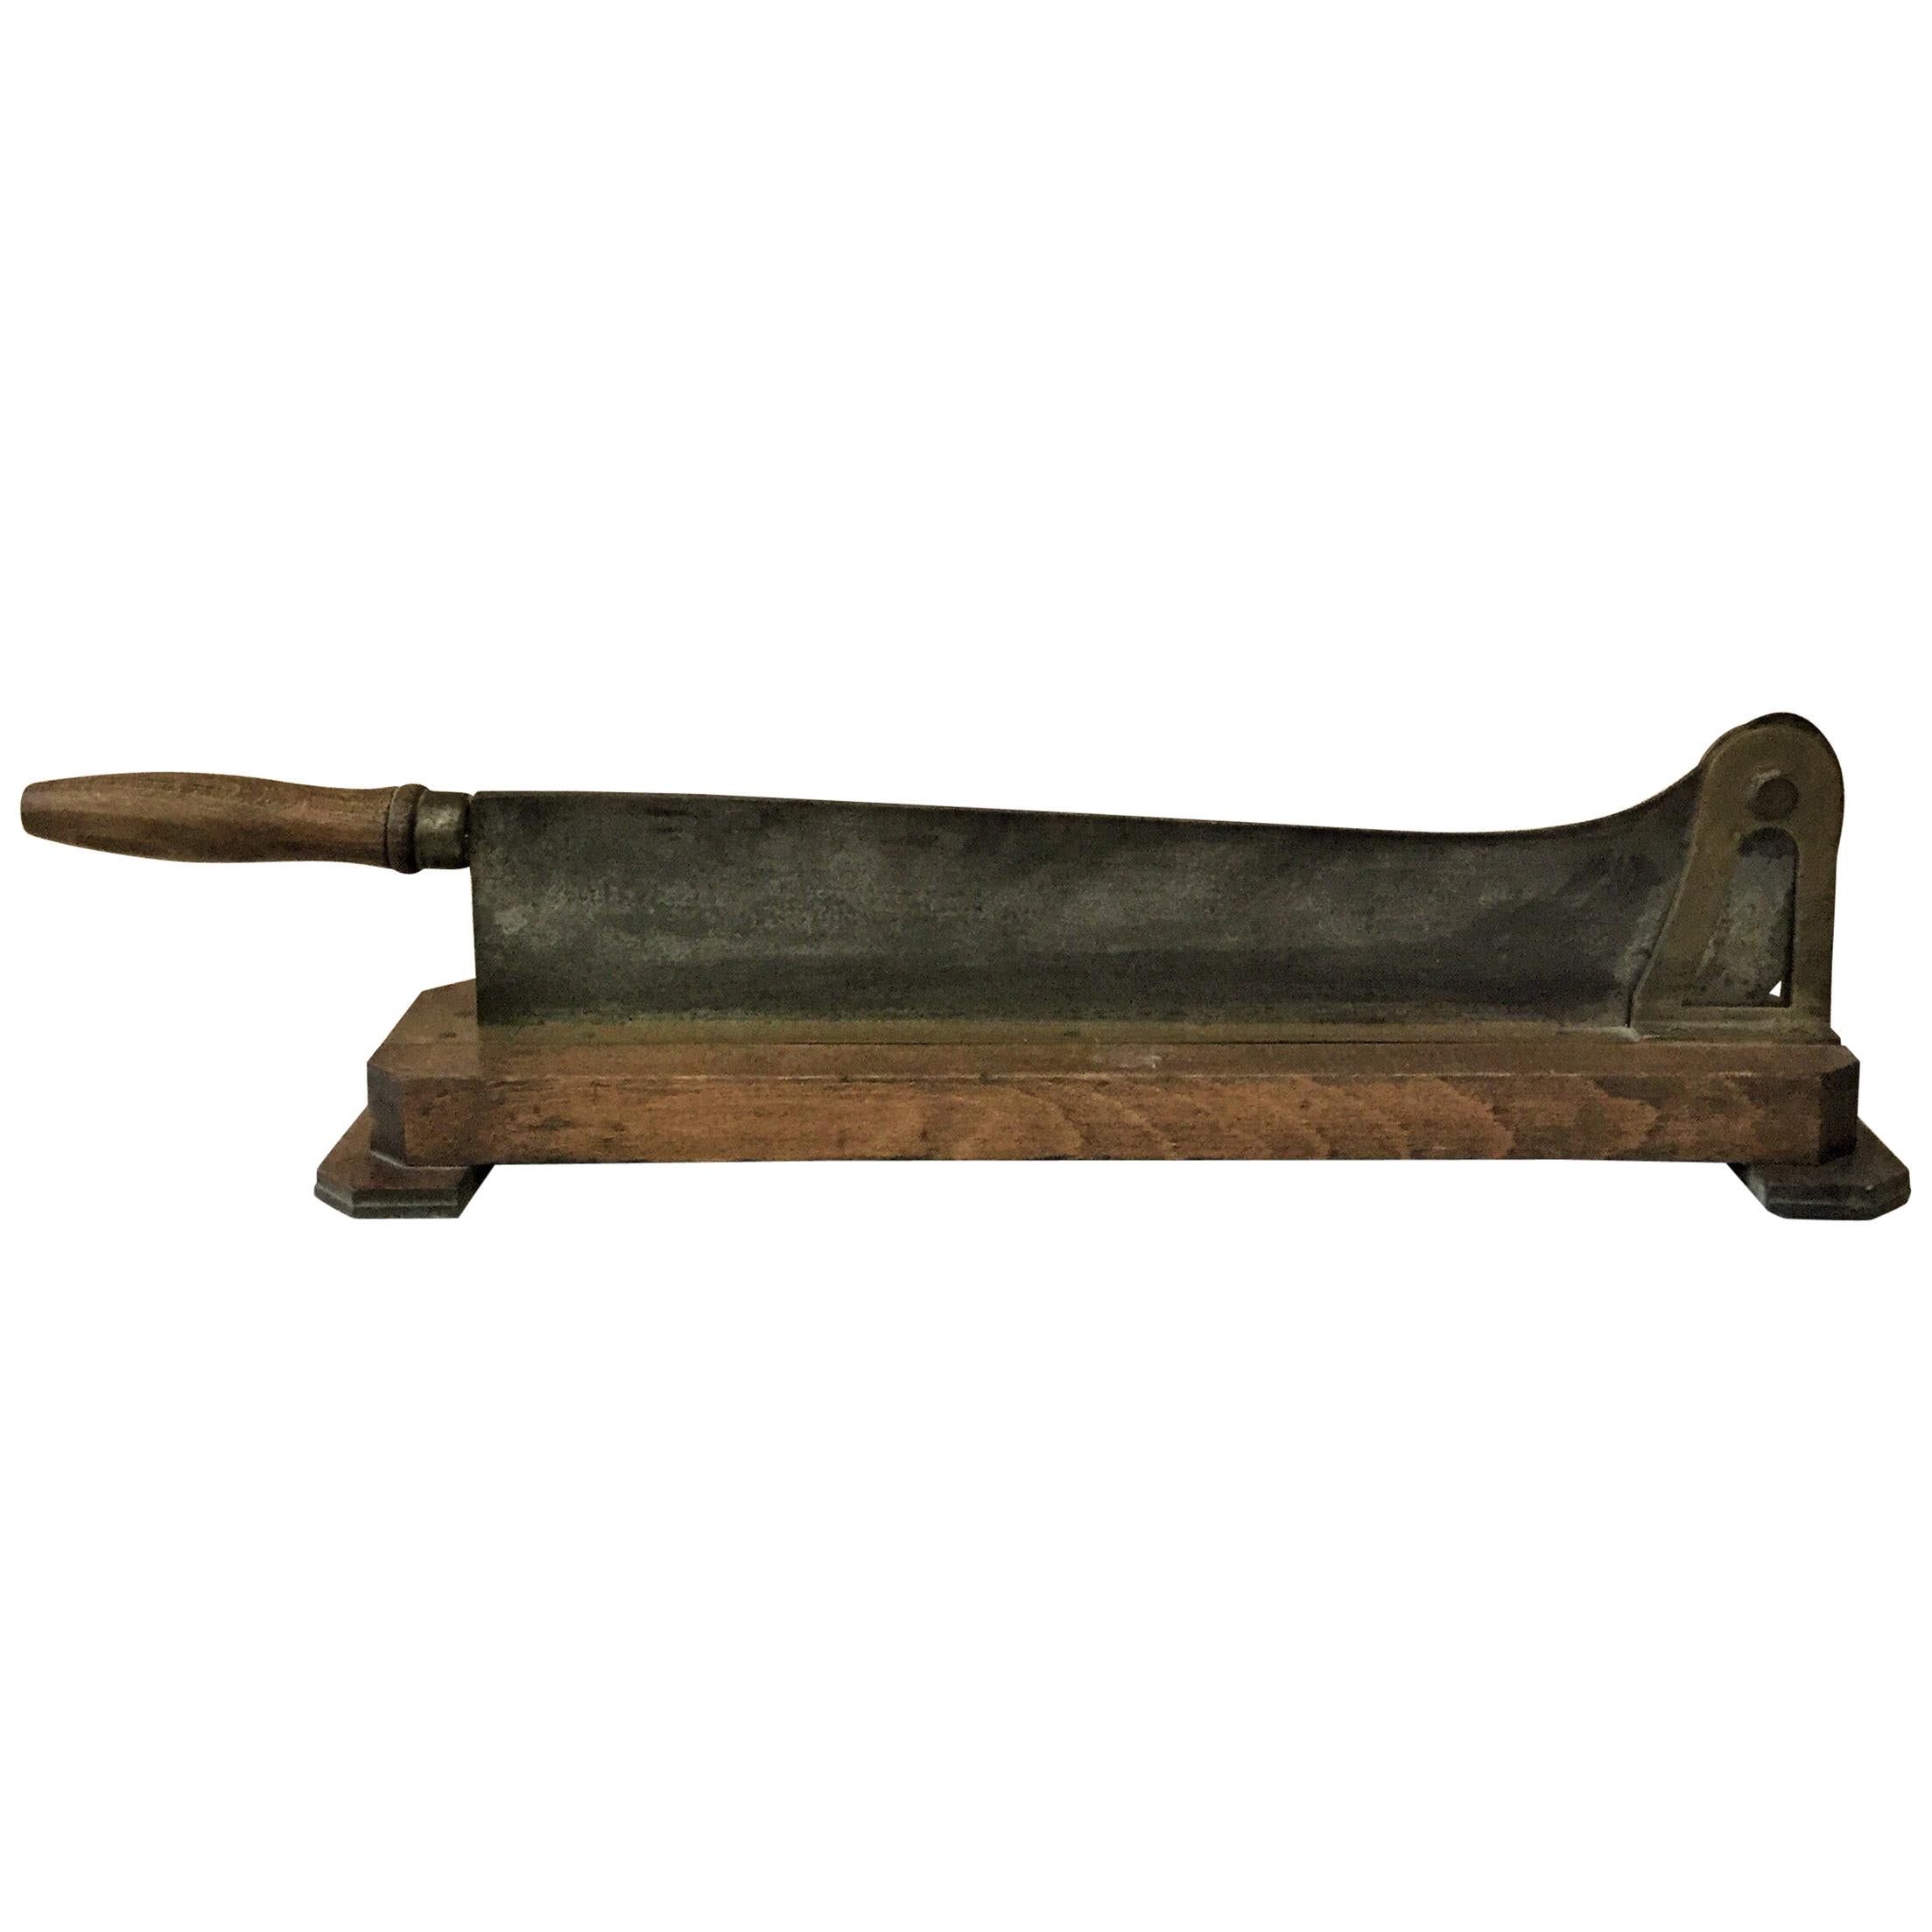 French Wood and Iron Bakery Bread Cutter, circa 1900